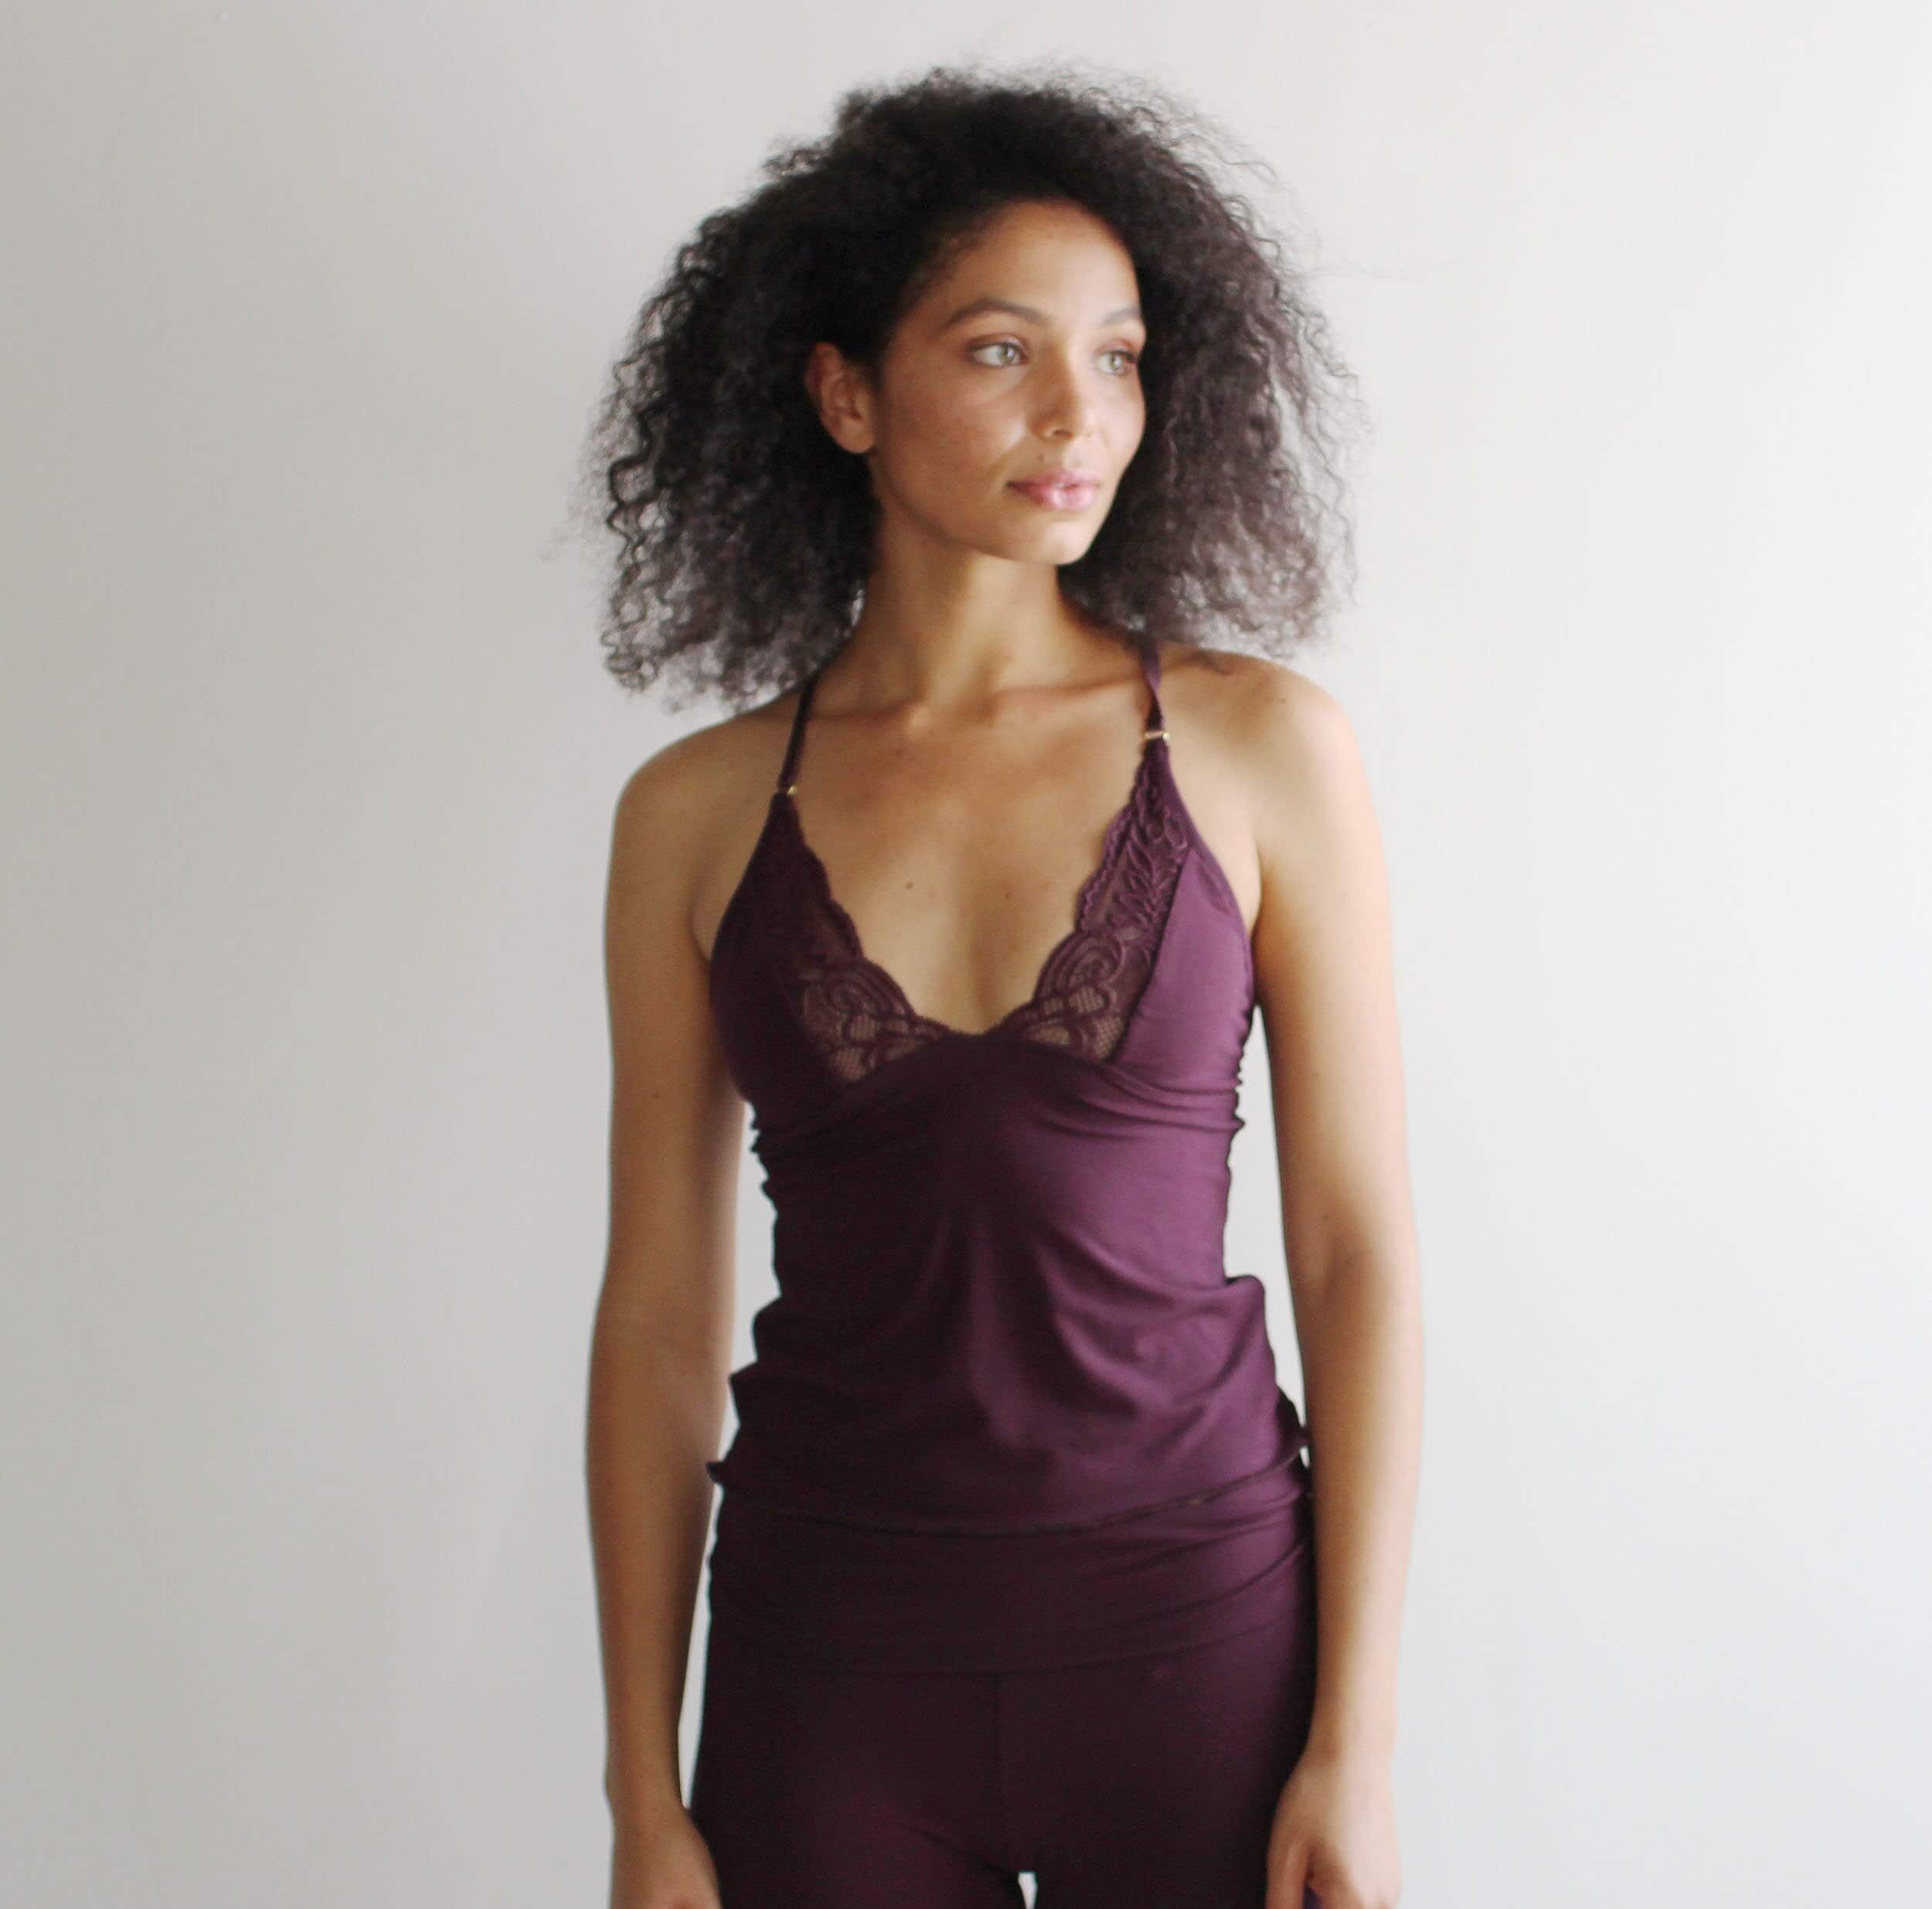 Bamboo Knit Camisole with Lace Trimmed cups, Lingerie Camisole, Lace Sleepwear, Natural Pajamas - made to order